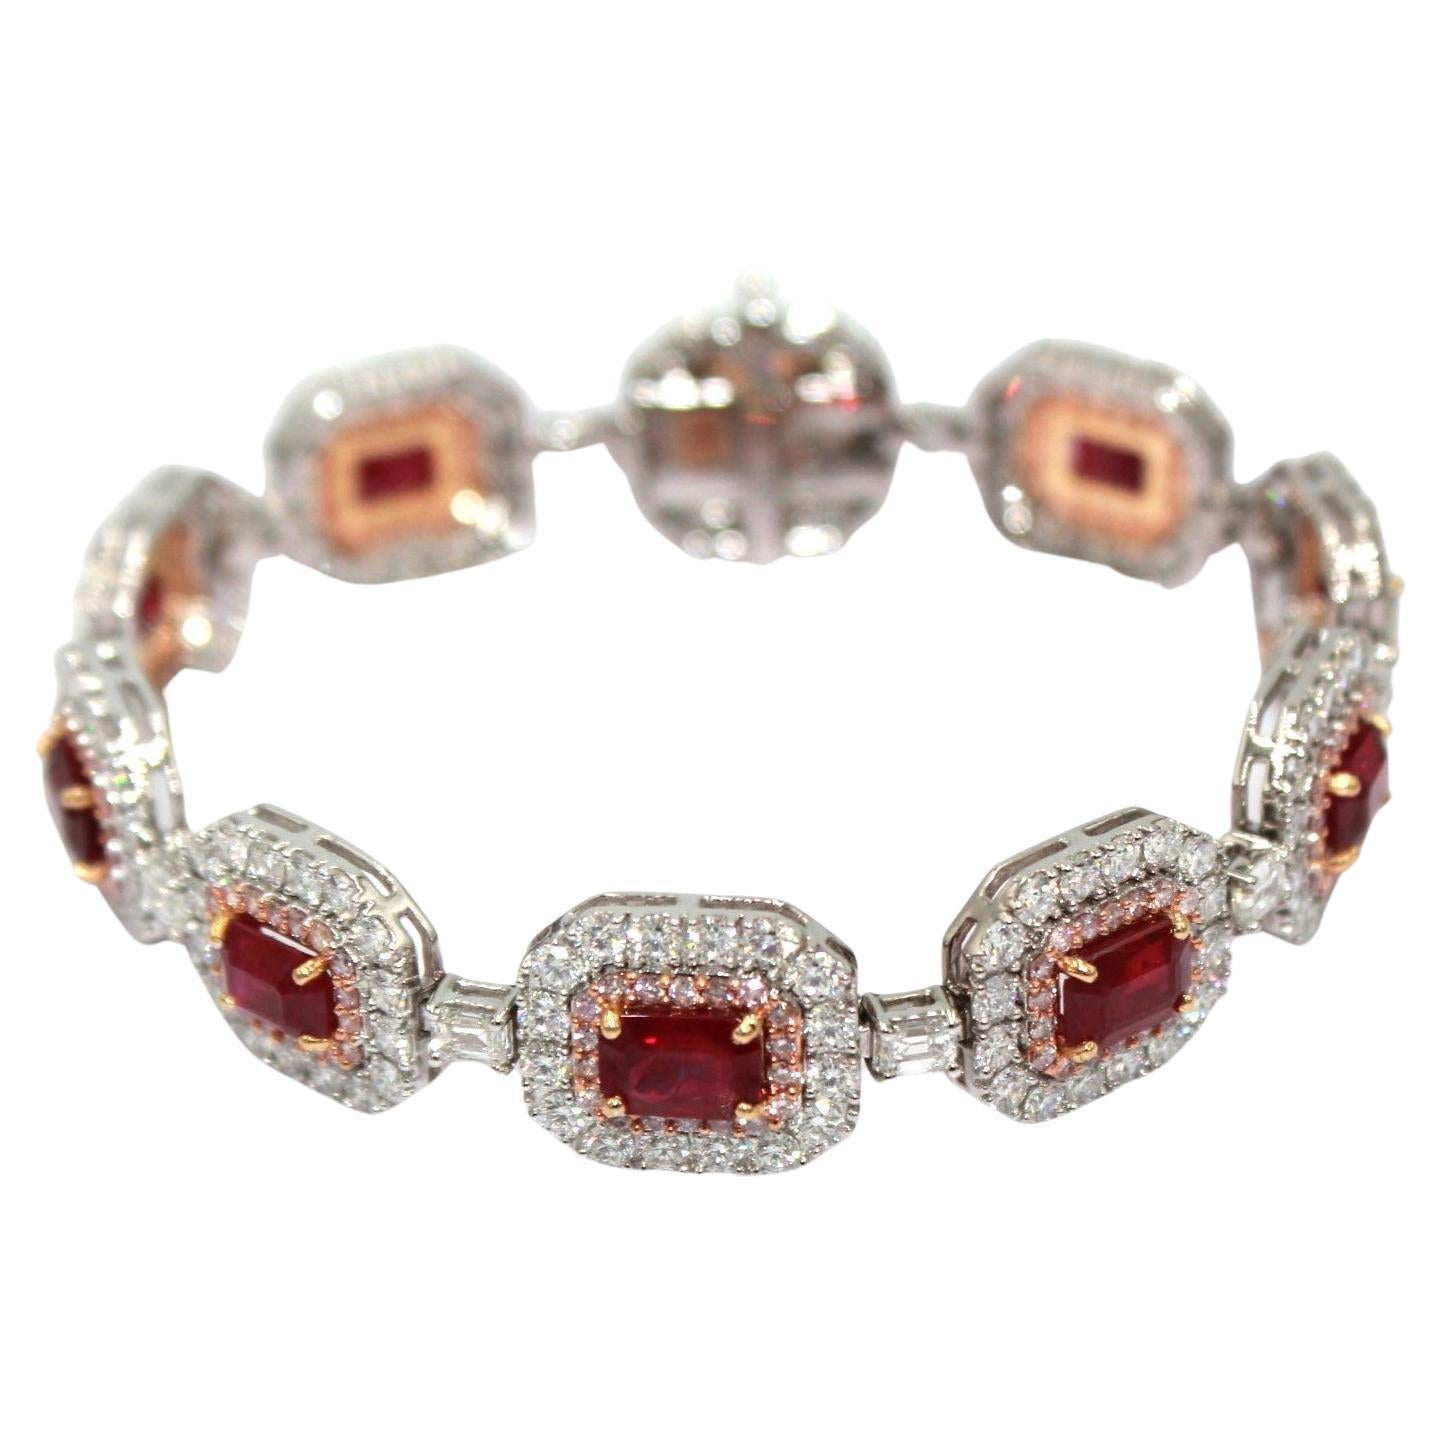 11.69 carats emerald-cut Burma Ruby with totaling a diamond weight of 10.48 carats. 

This stunning Ruby & Diamond Bracelet will highlight your uniqueness and elegance. 

Item Details:
- Type: Bracelet
- Metal: 18K Gold 

Color Stone Details:
-